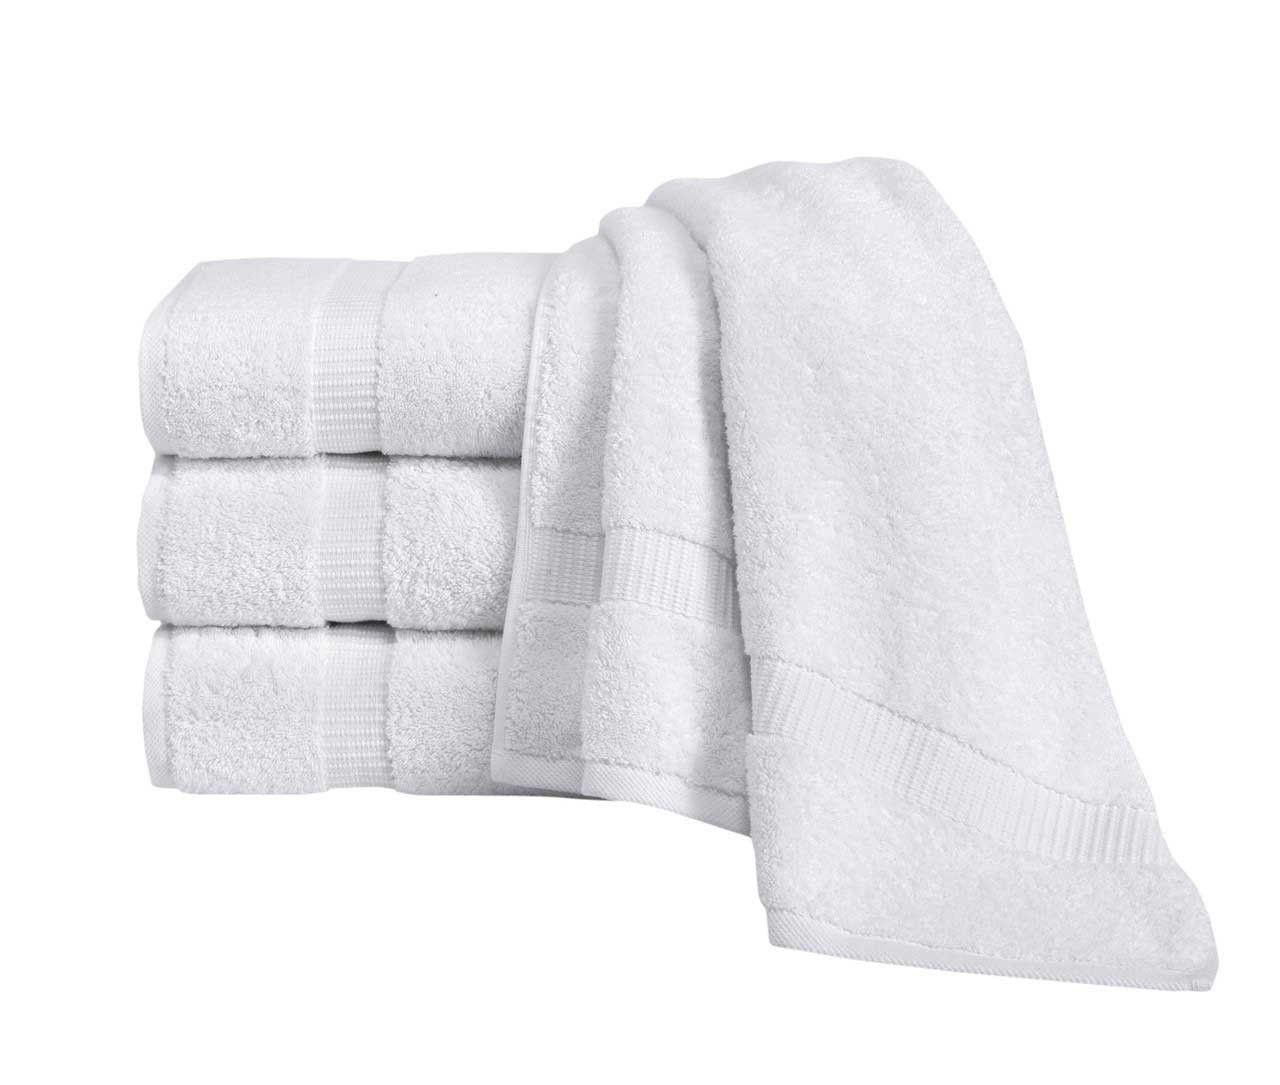 Do these white towels come in other colors?